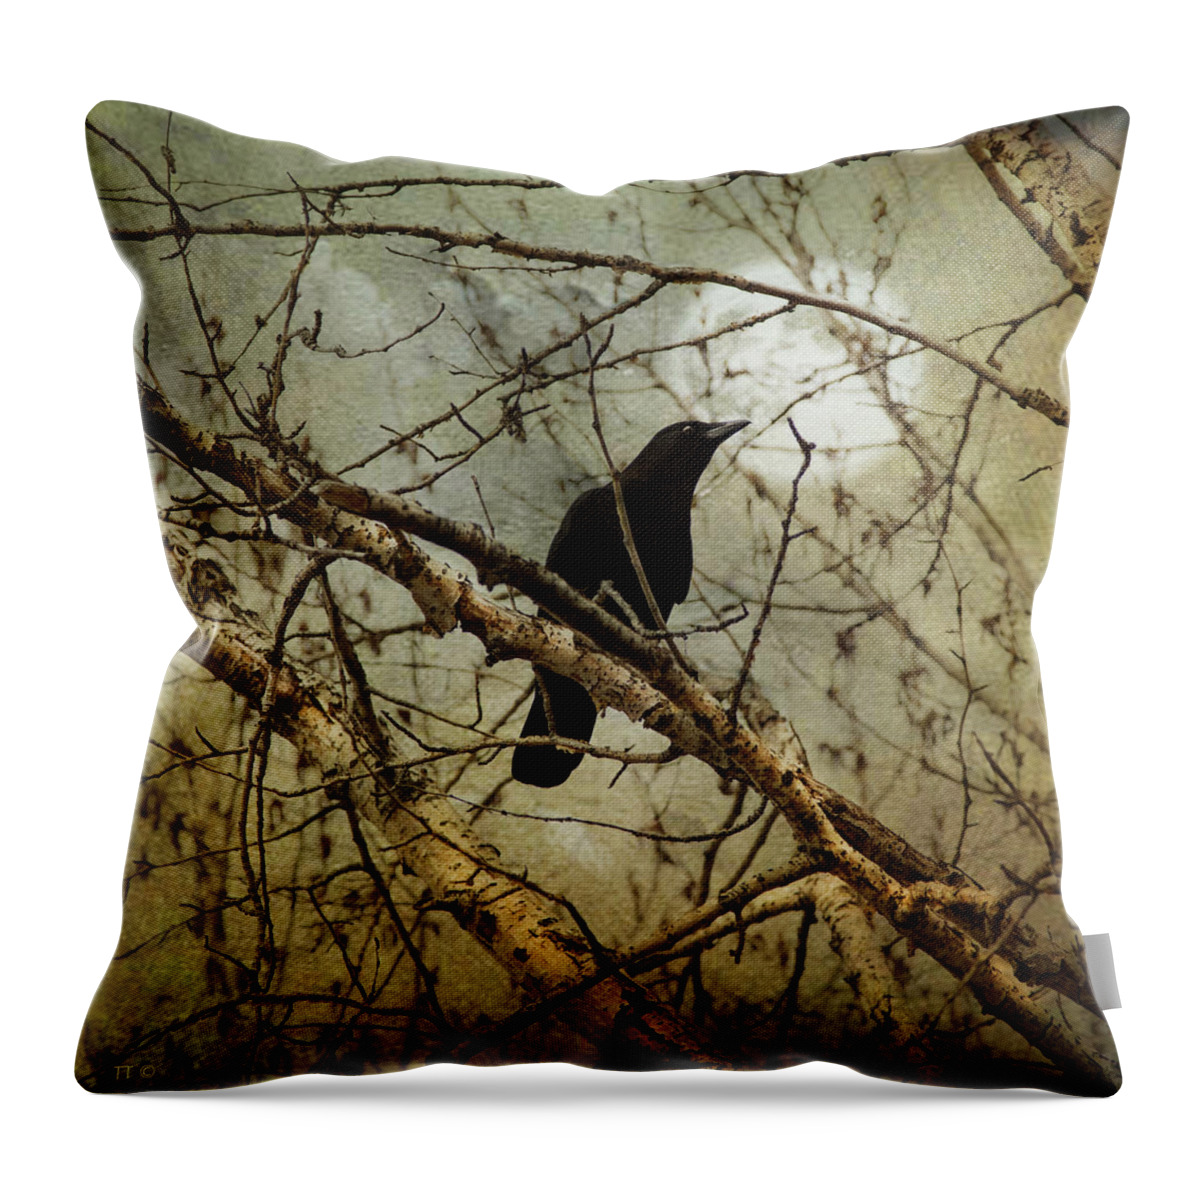 Theresa Tahara Throw Pillow featuring the photograph The Crow And The Moon by Theresa Tahara